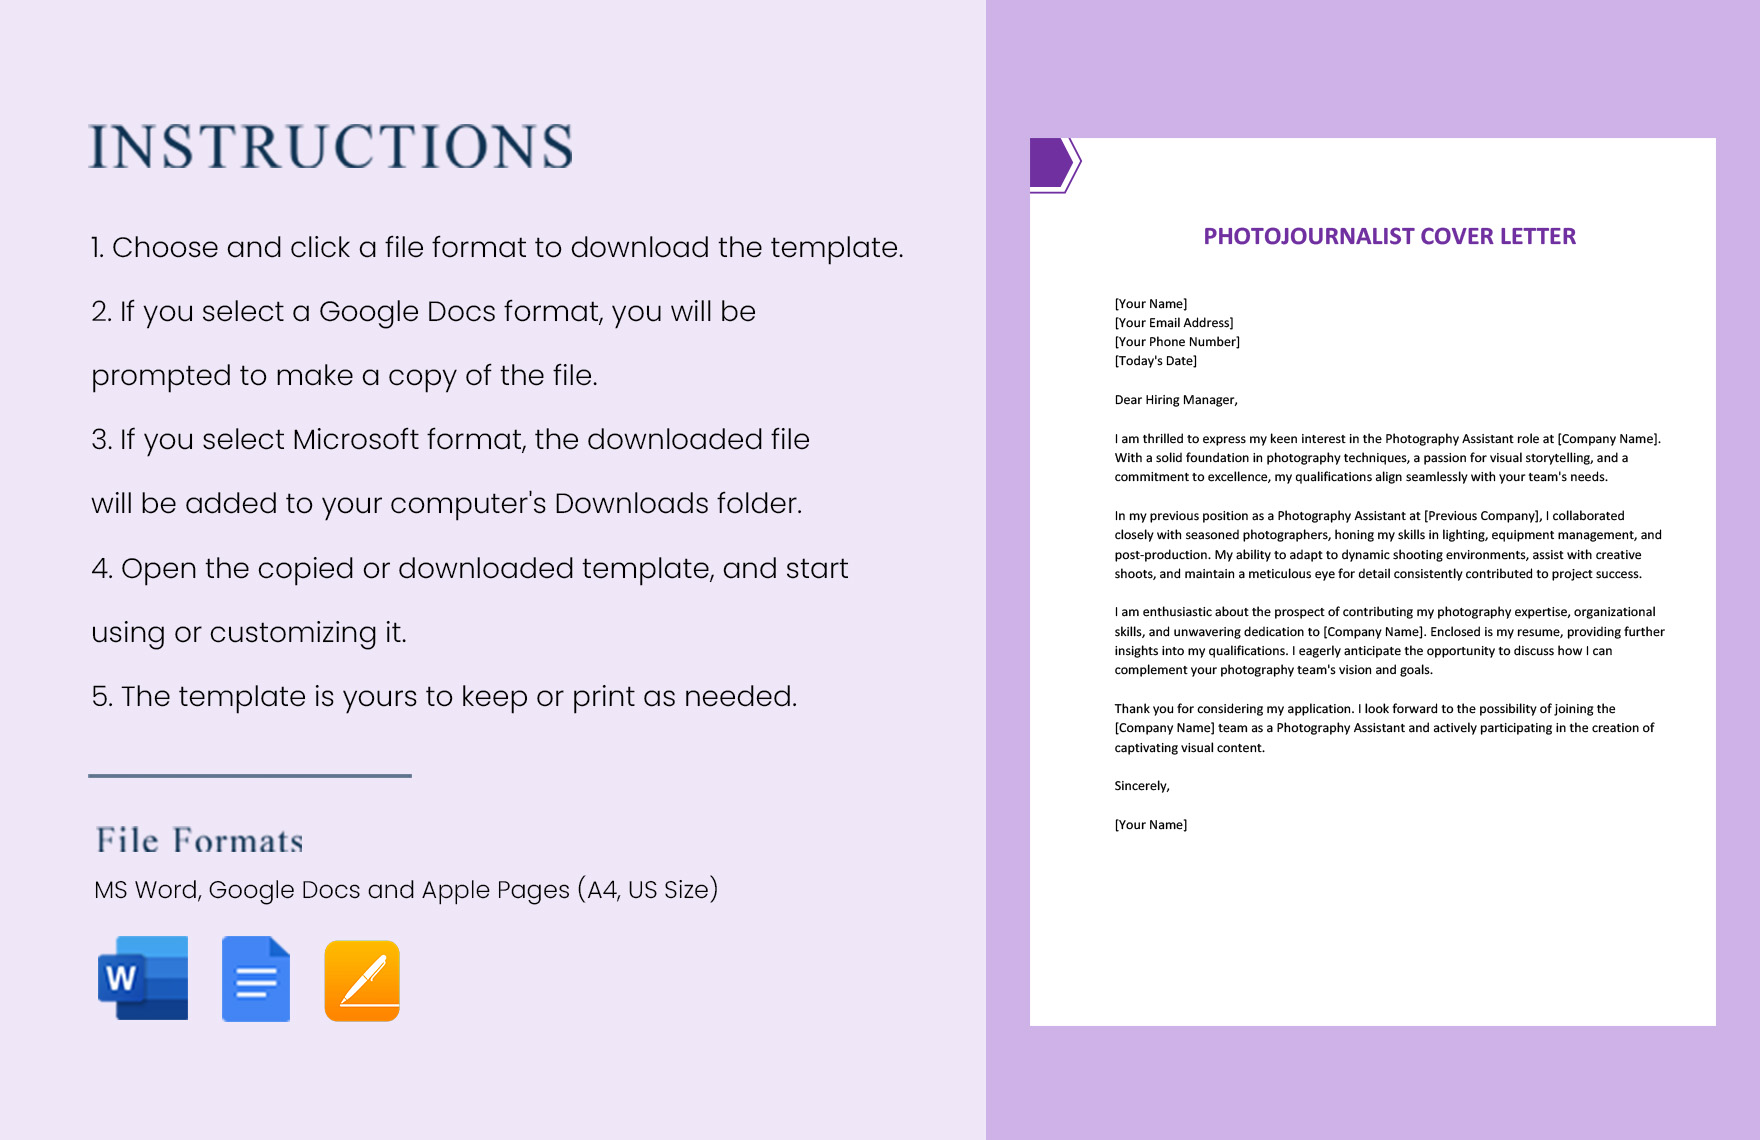 Photojournalist Cover Letter